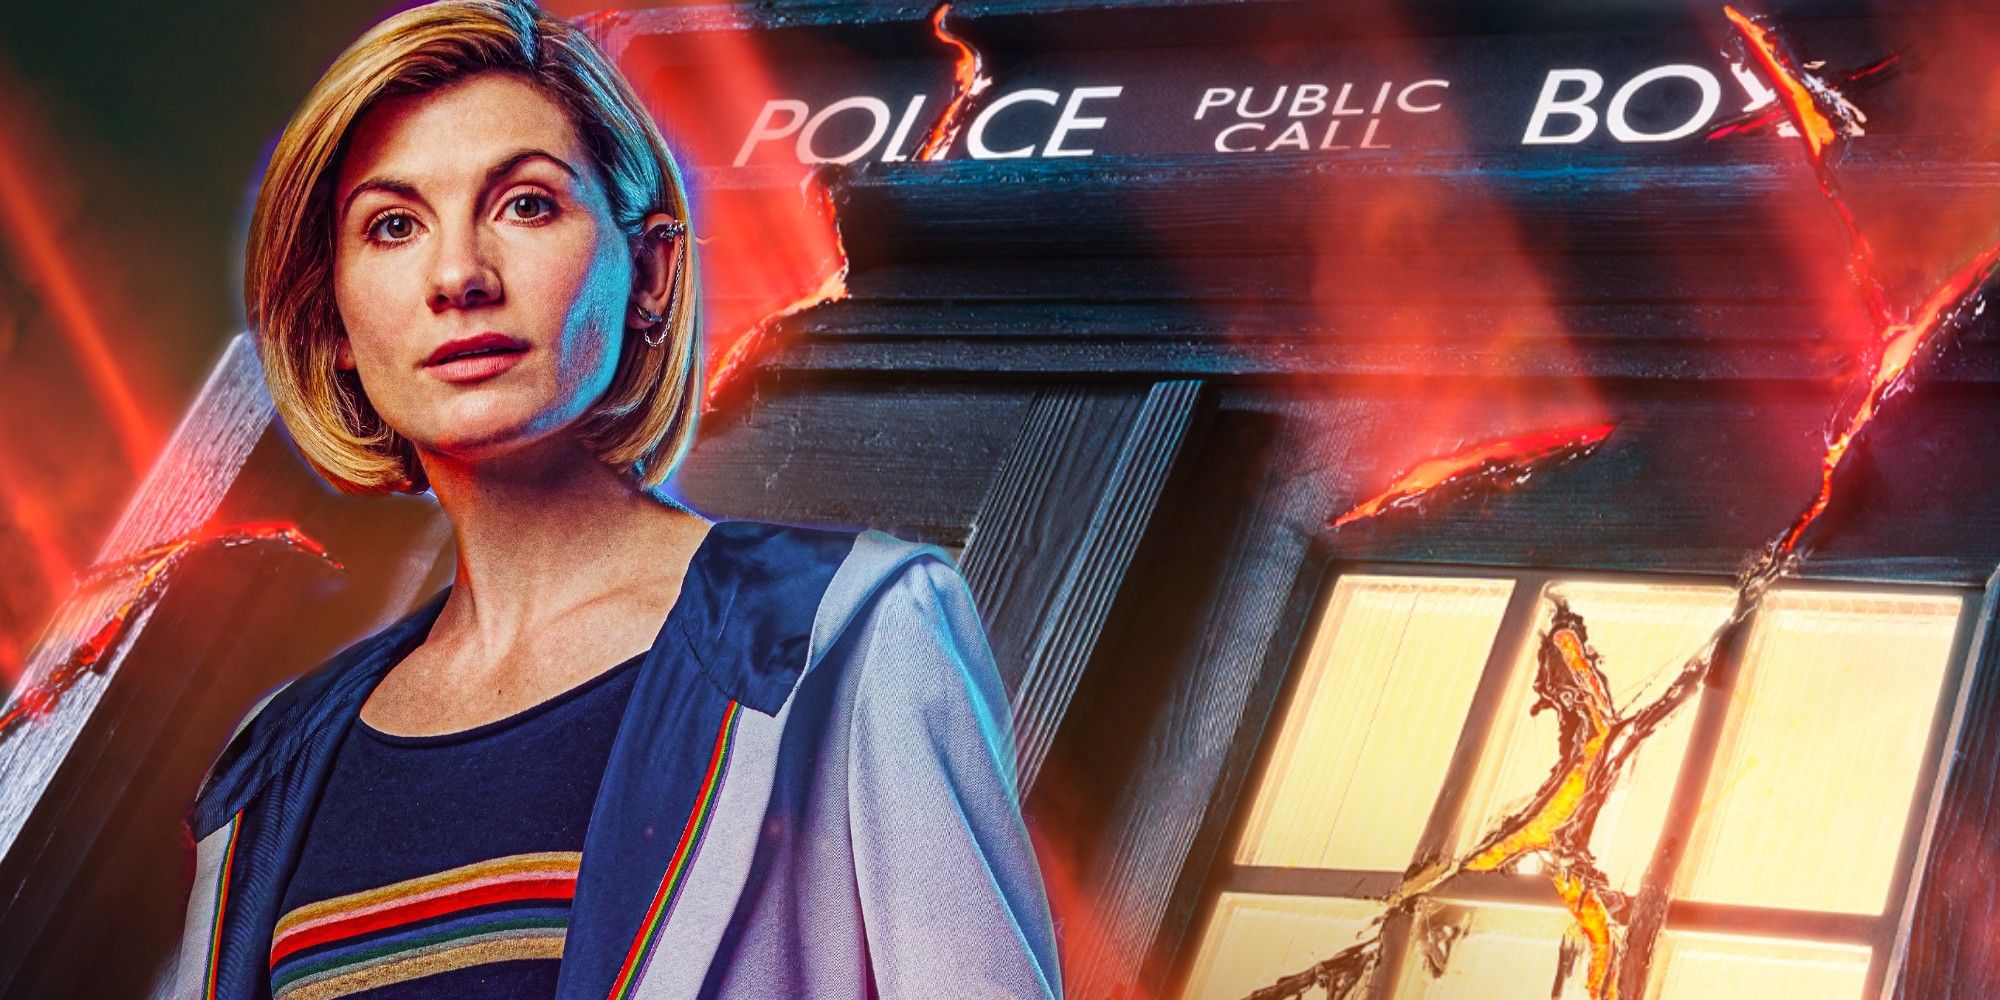 Jodie Whittaker as the Thirteenth Doctor from Doctor Who outside the TARDIS.